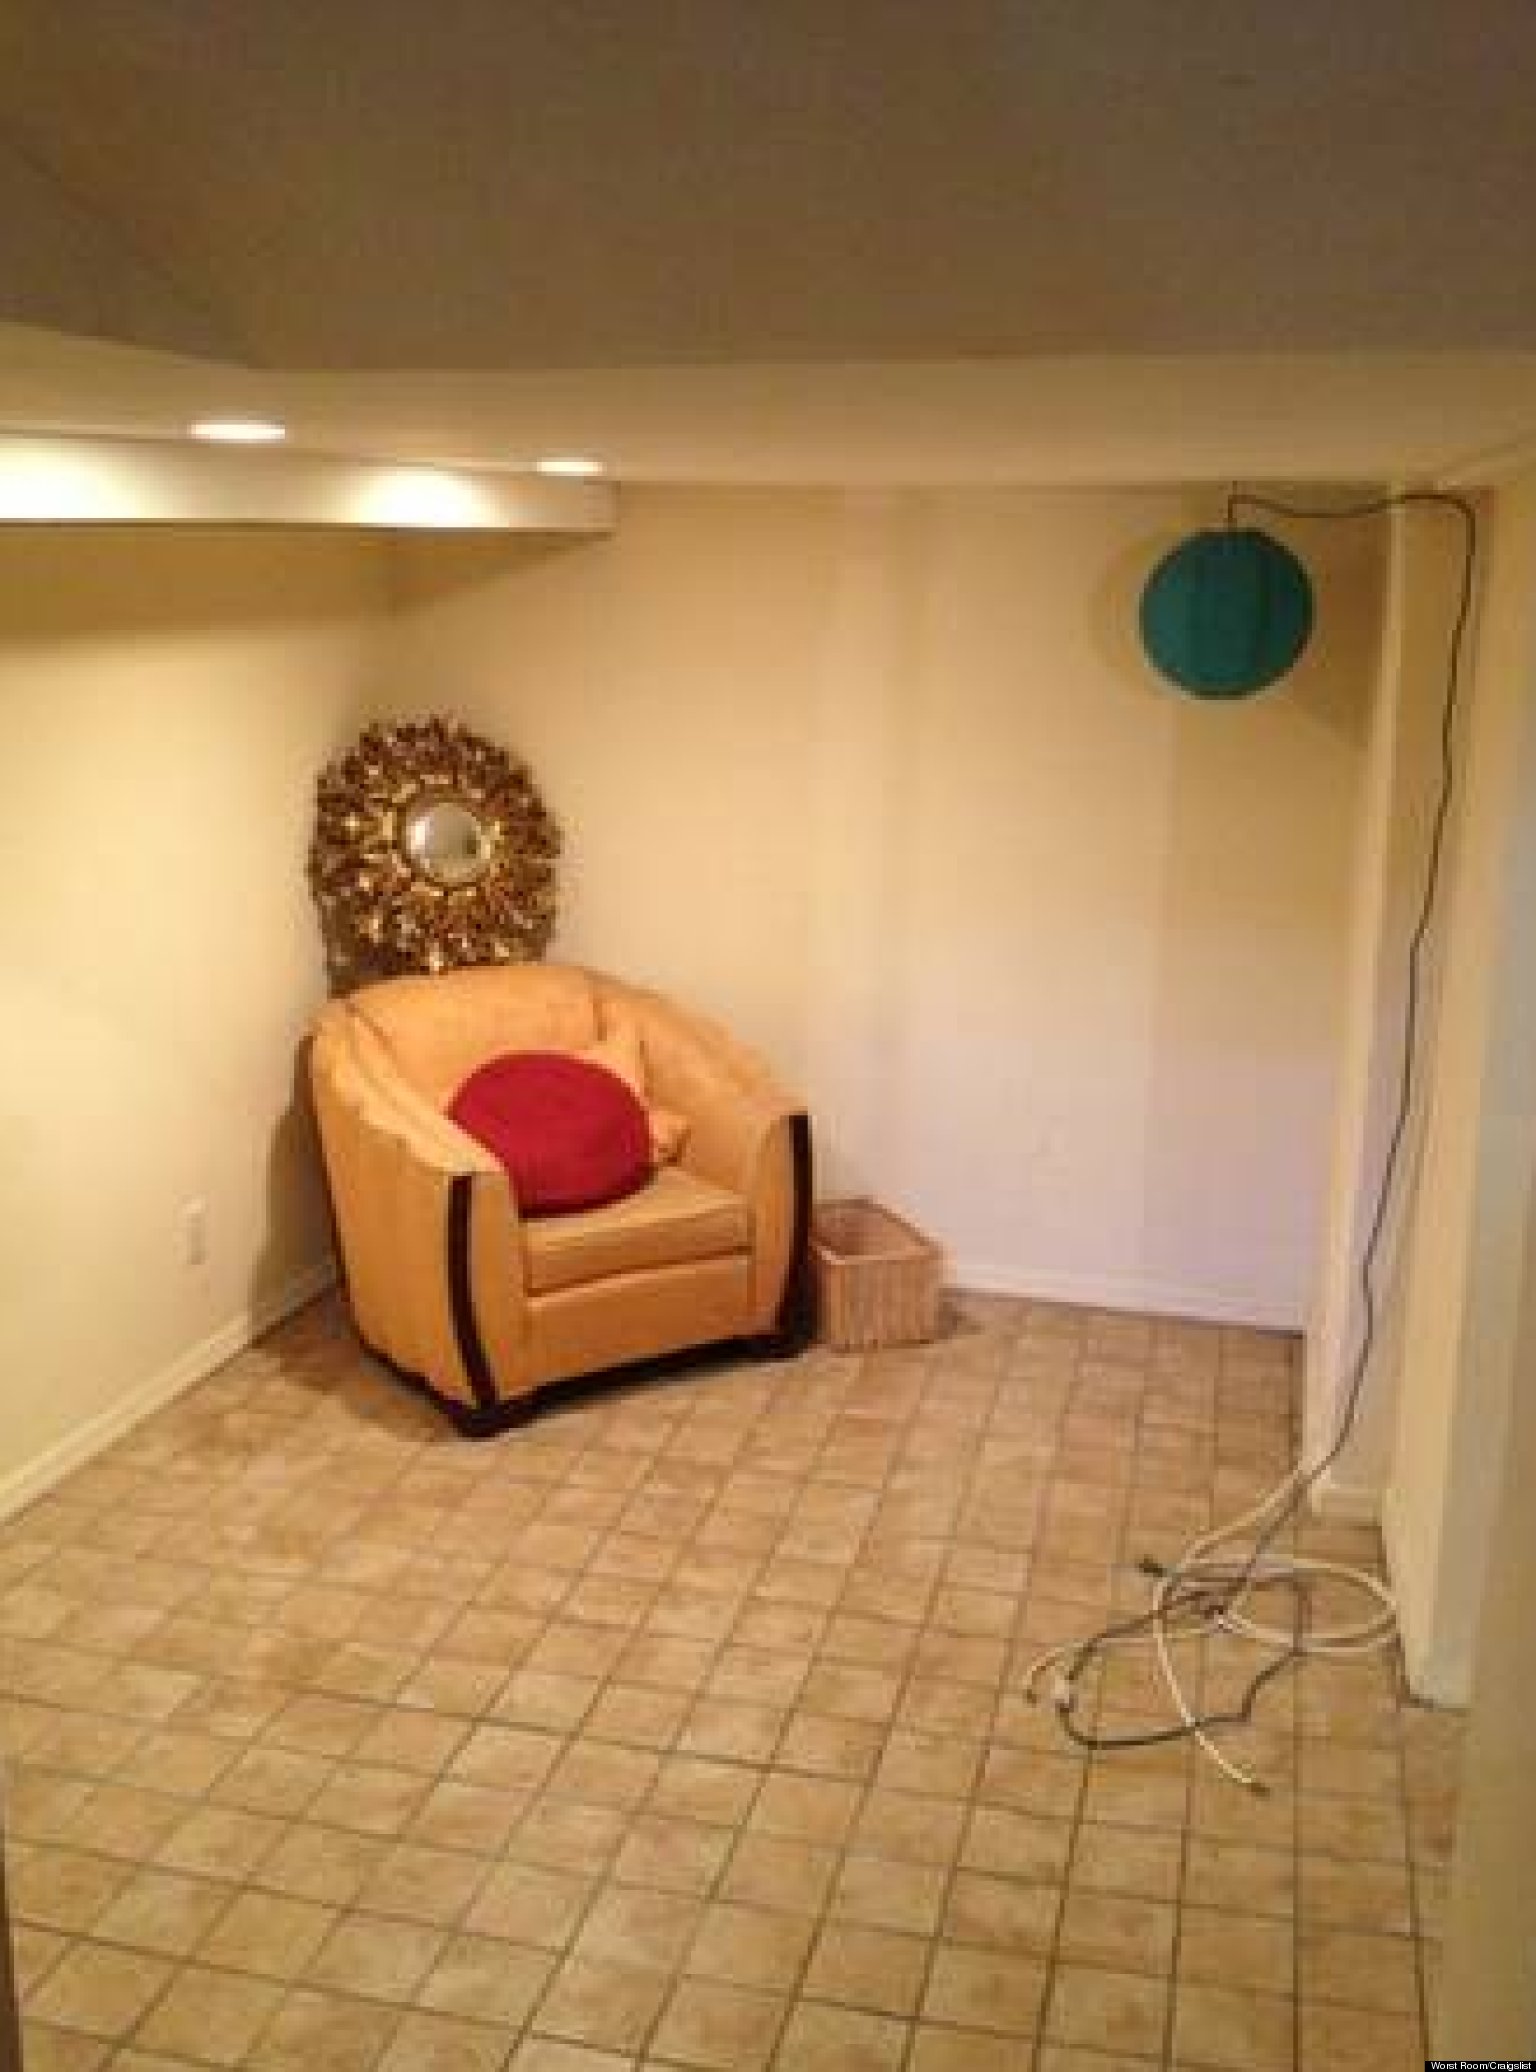 jersey city heights apartments for rent craigslist